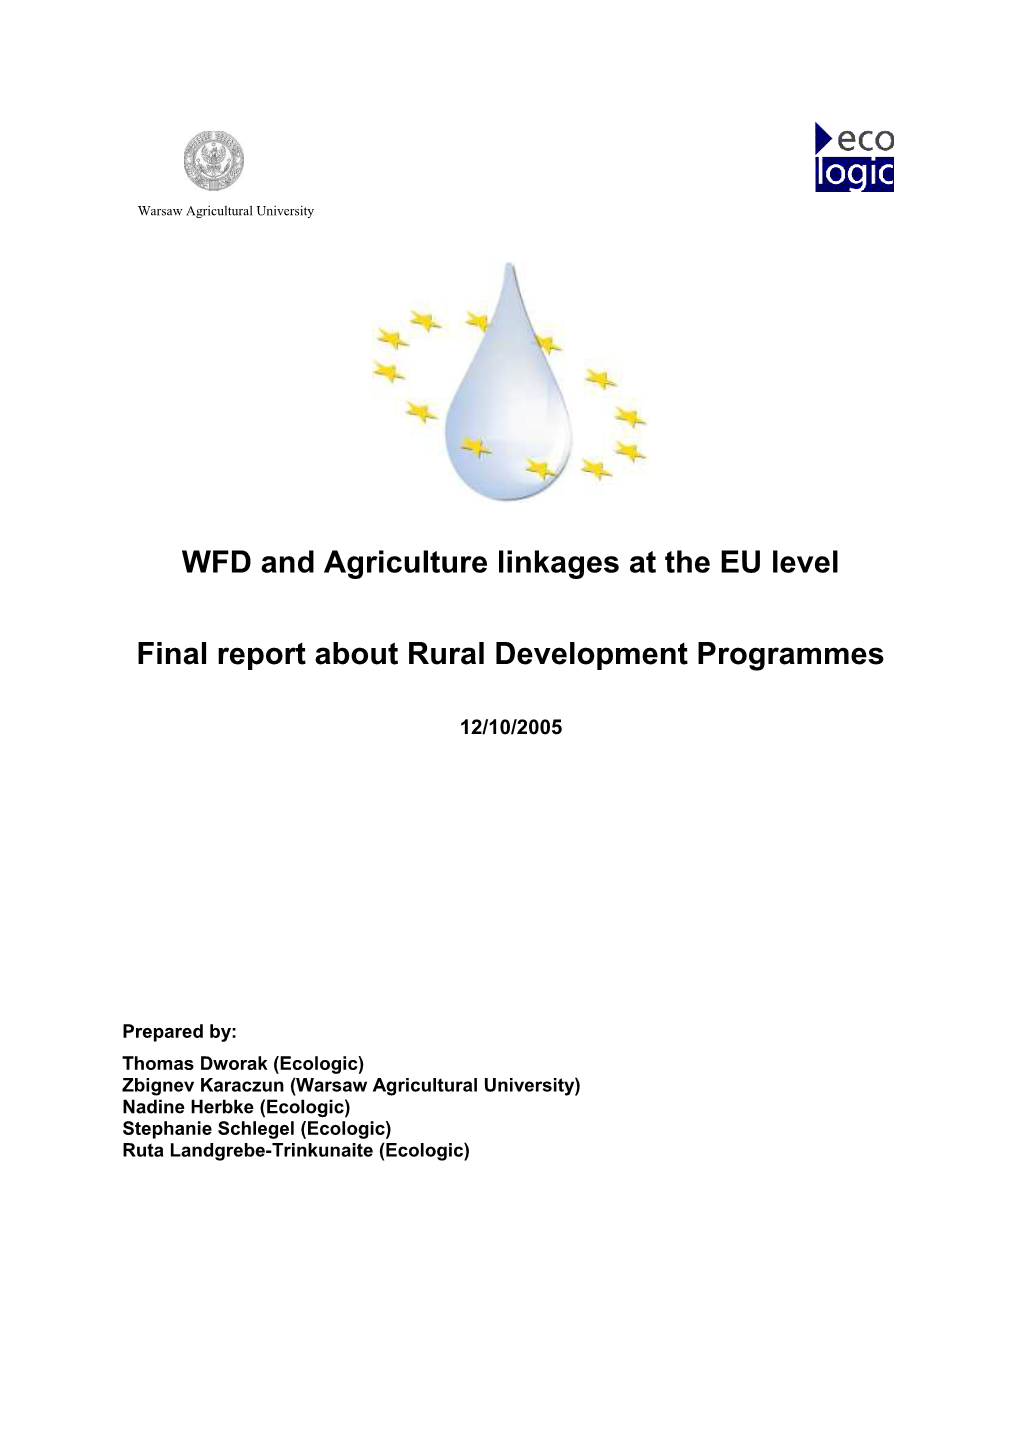 Links Between WFD and Agriculture